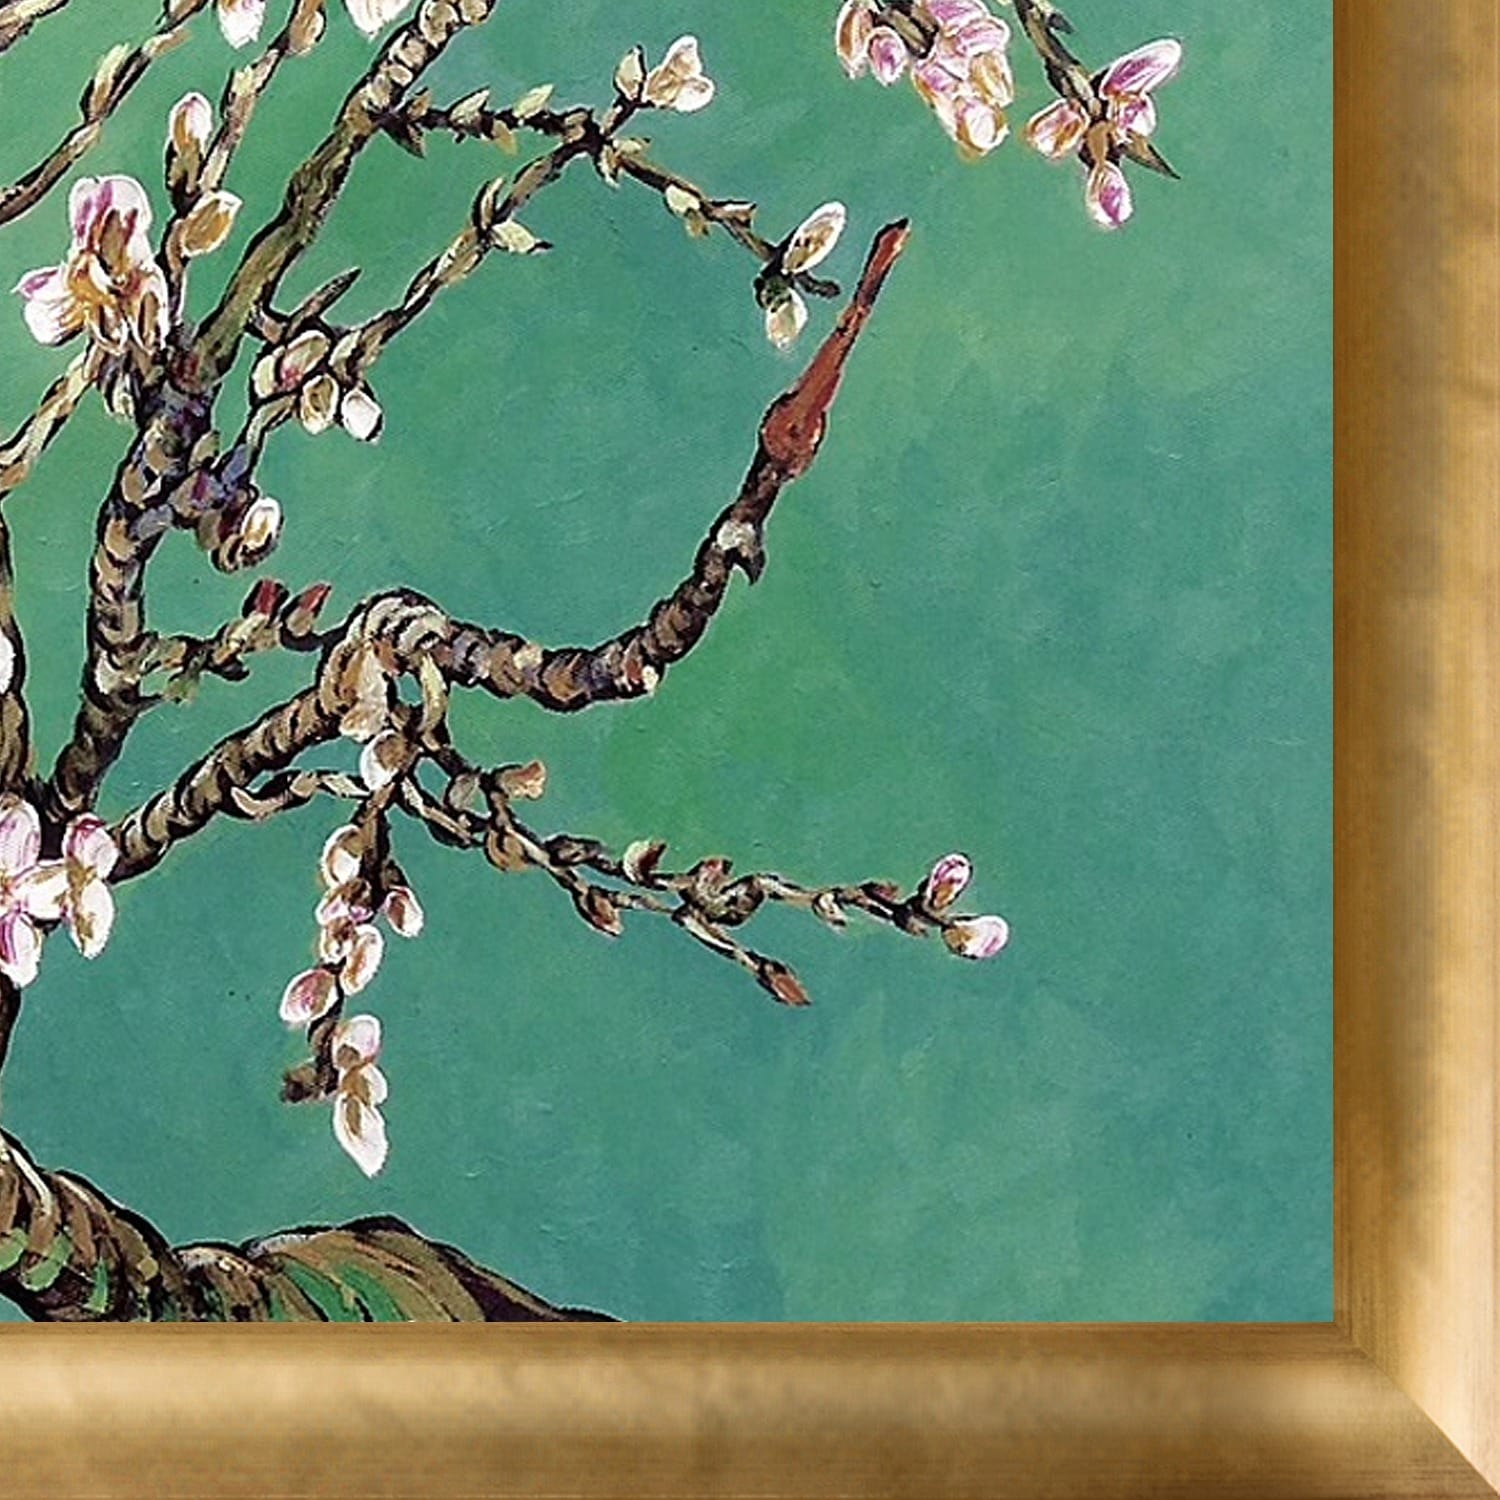 Jade Framed Hand Painted Original Artwork With Gold Luminoso Frame La Pastiche Branches Of An Almond Tree In Blossom 